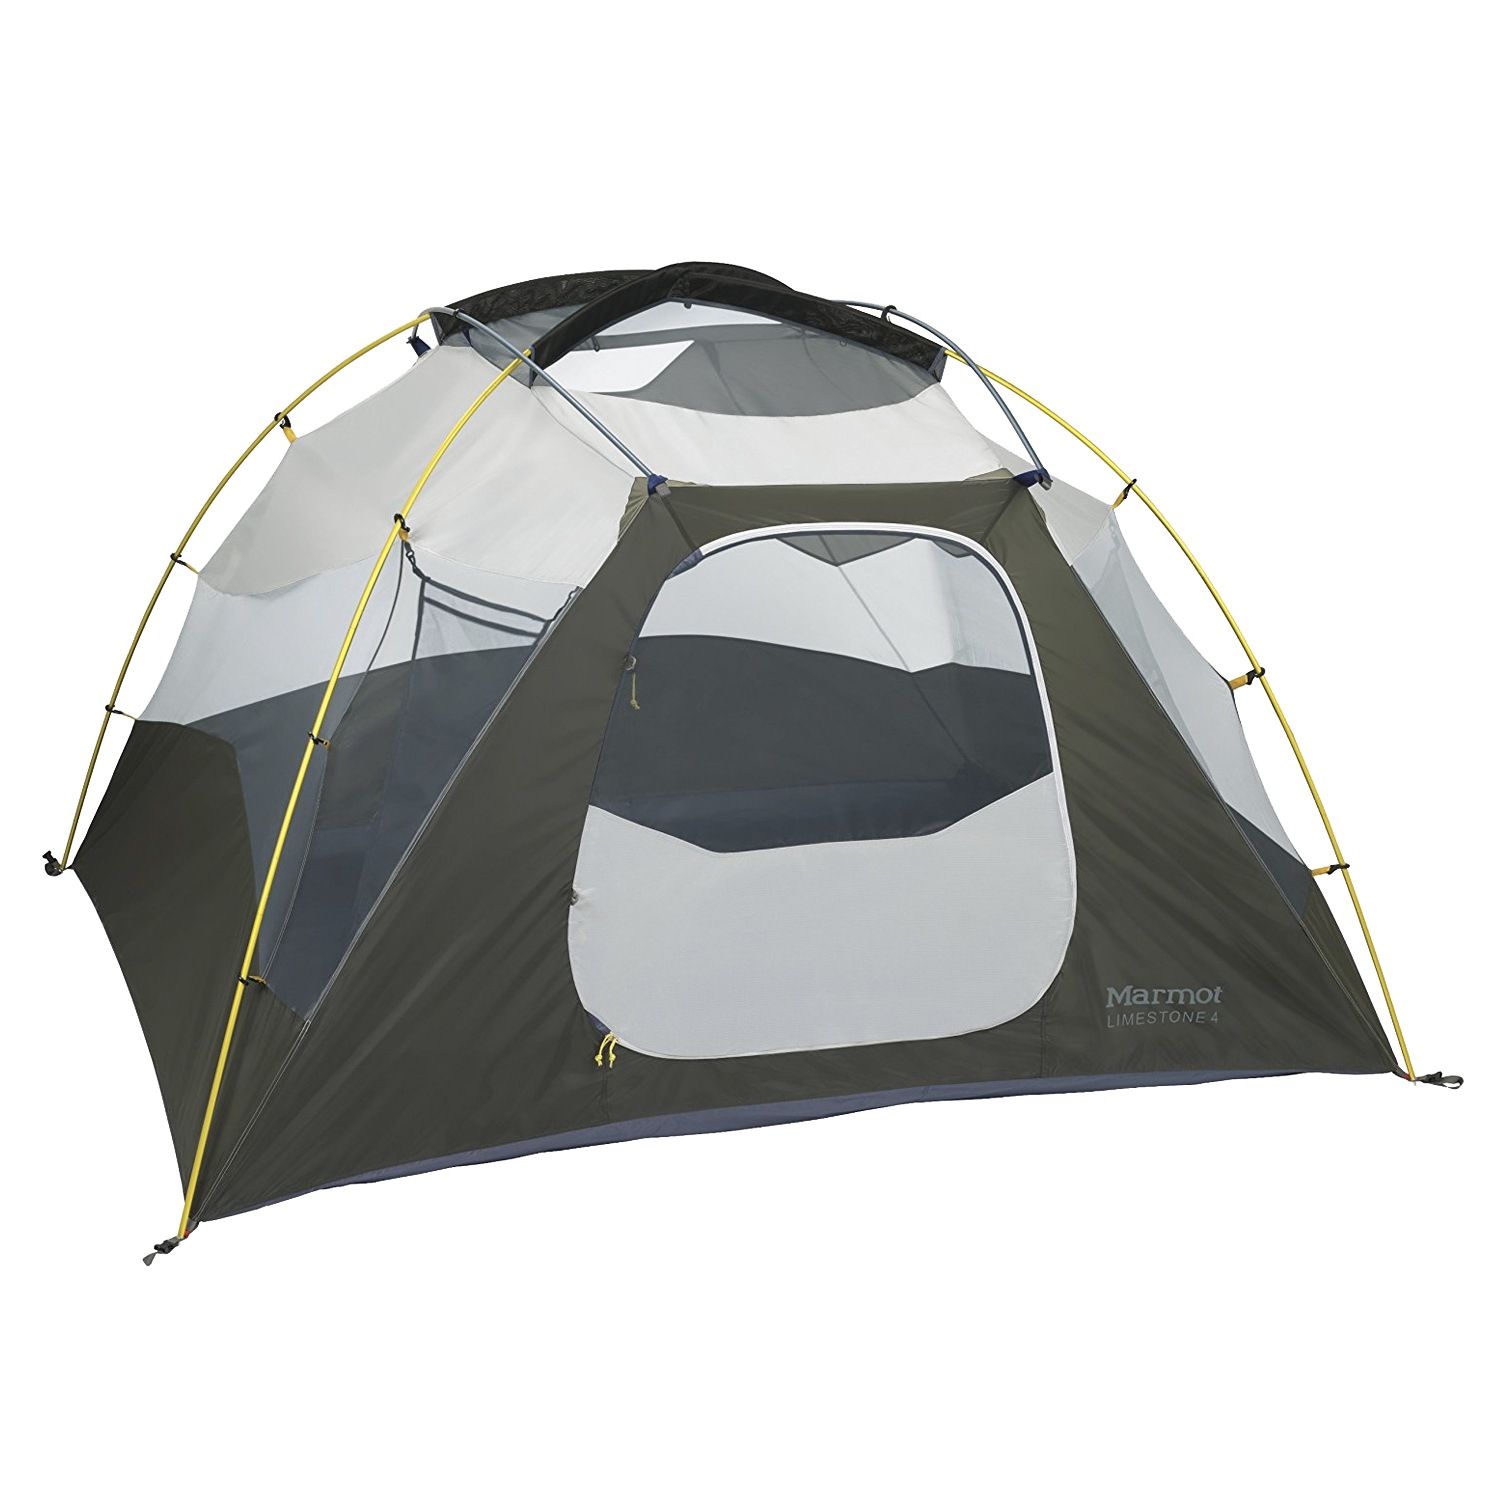 Basics Dome Camping Tent With Rainfly and Carry Bag, 4/8 Person